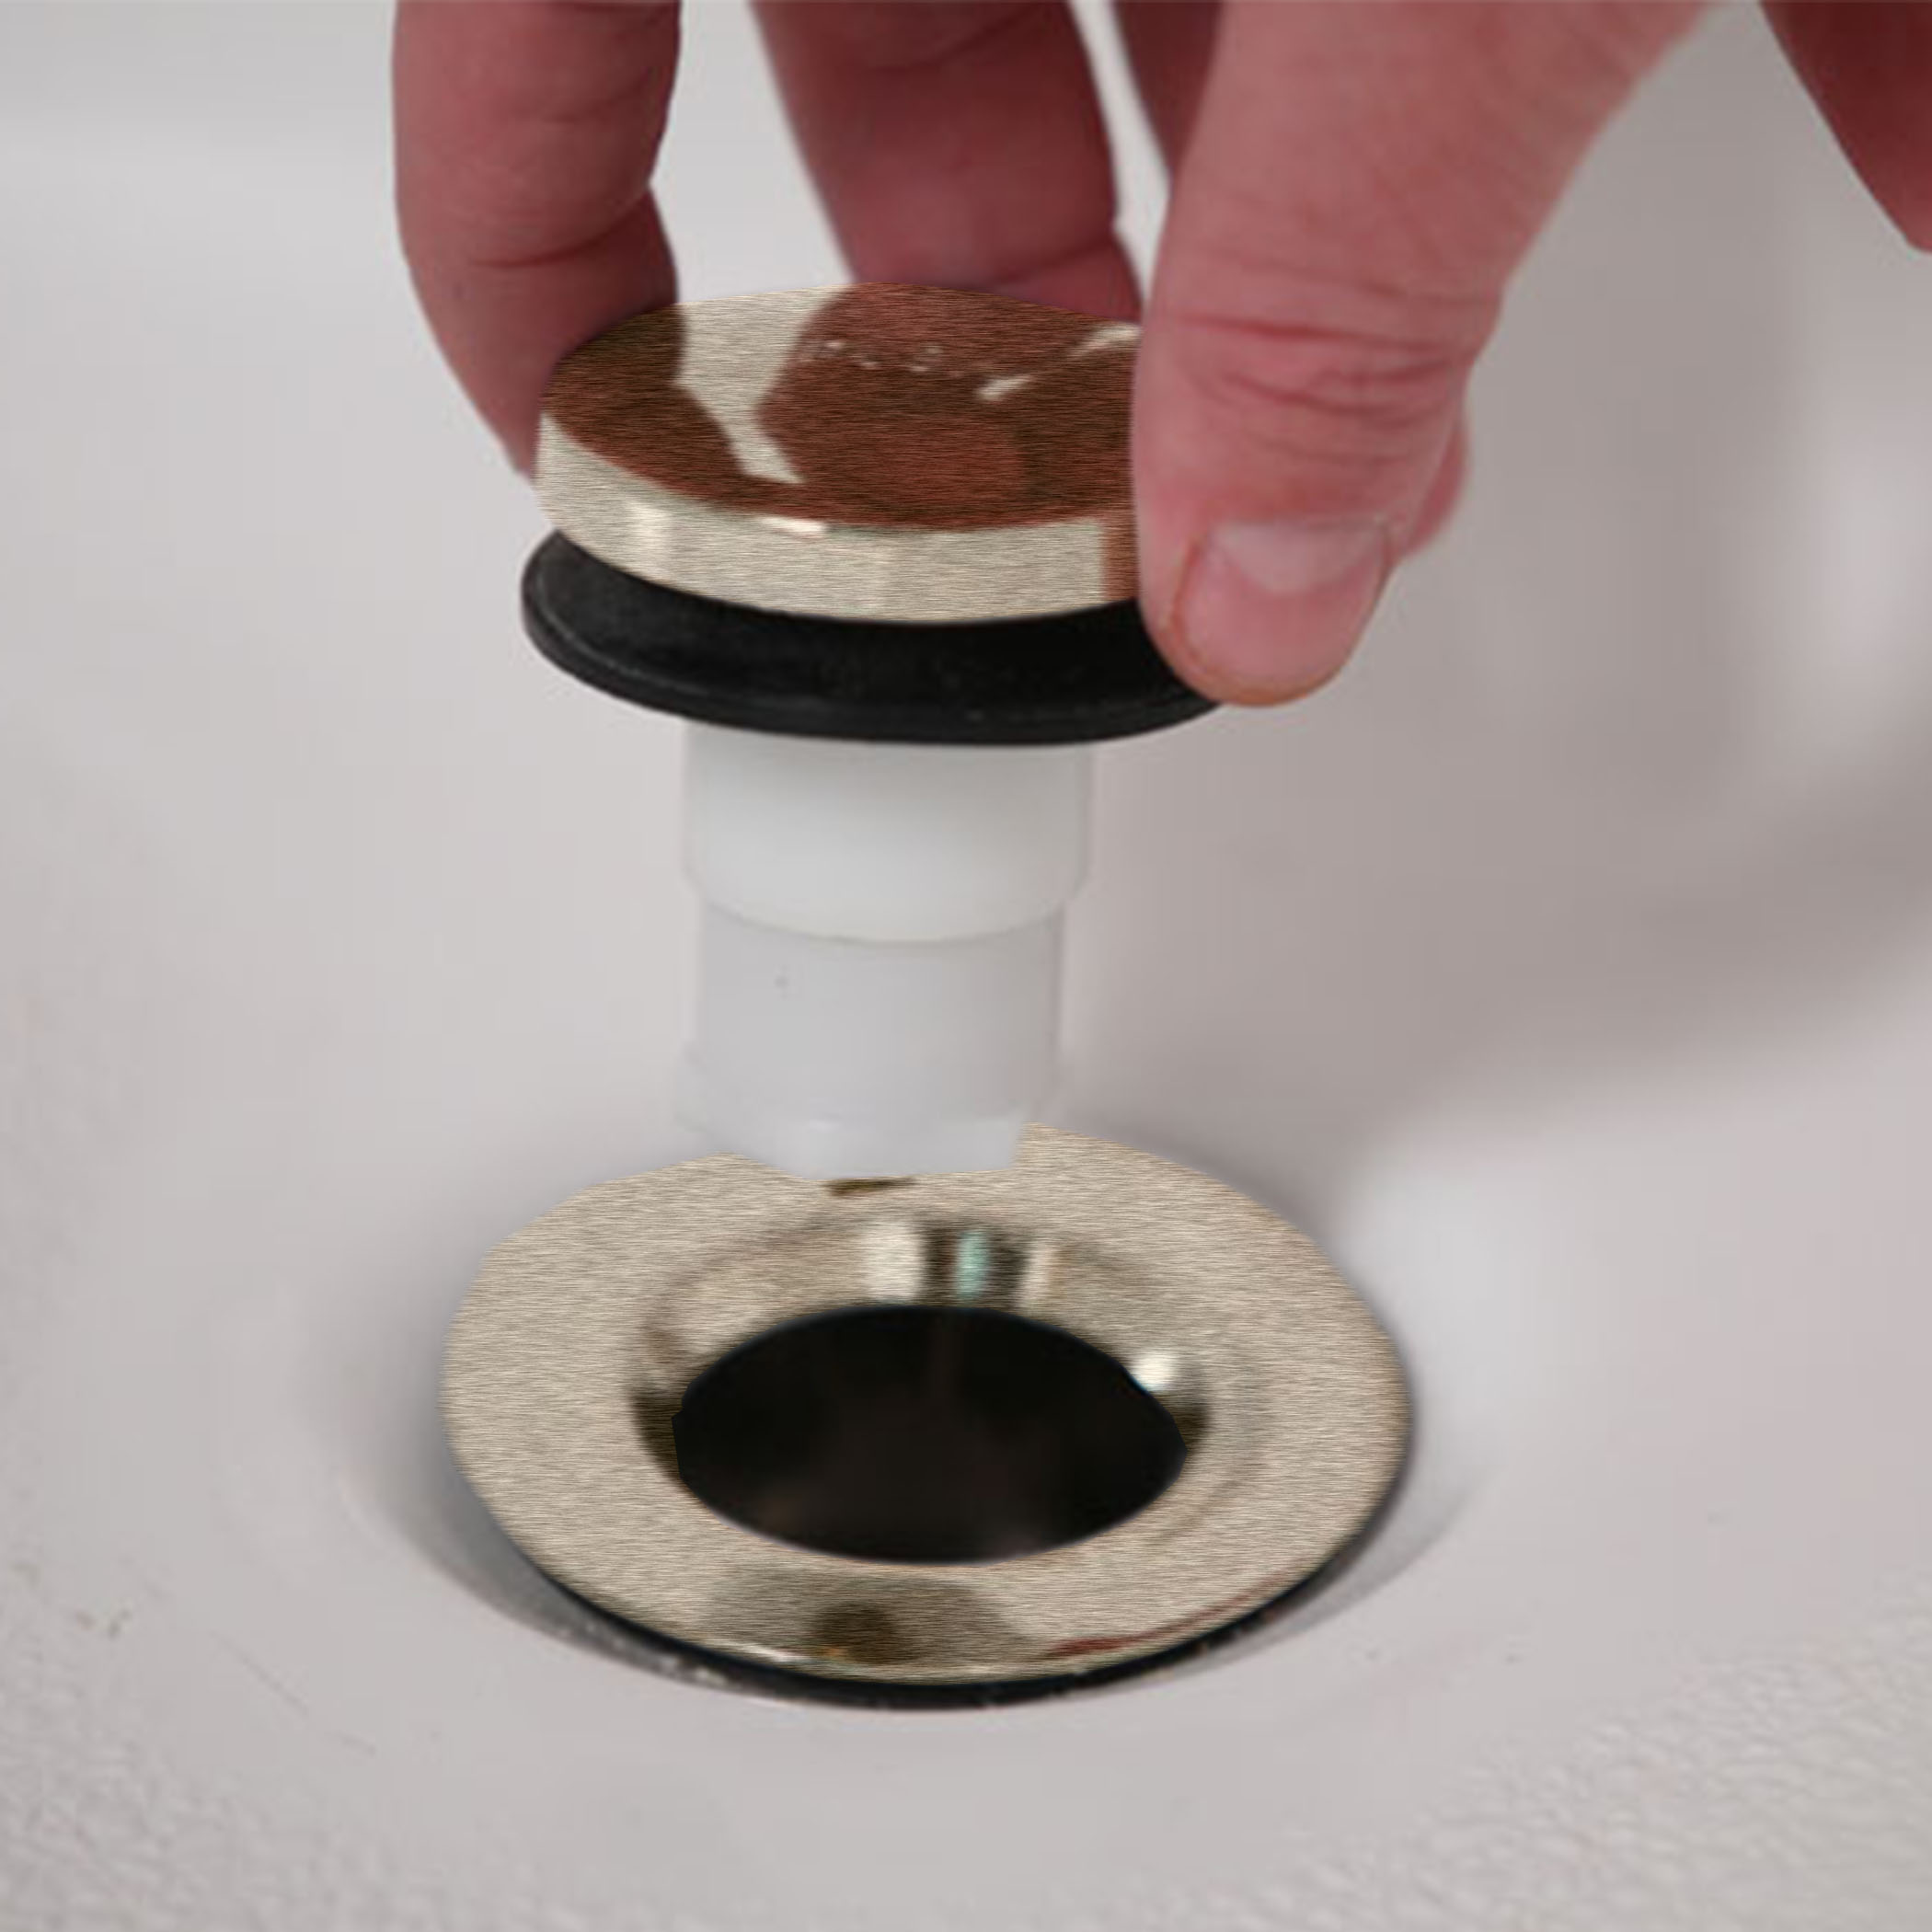 How To Replace A Bathtub Drain Stopper (Toe Touch) 